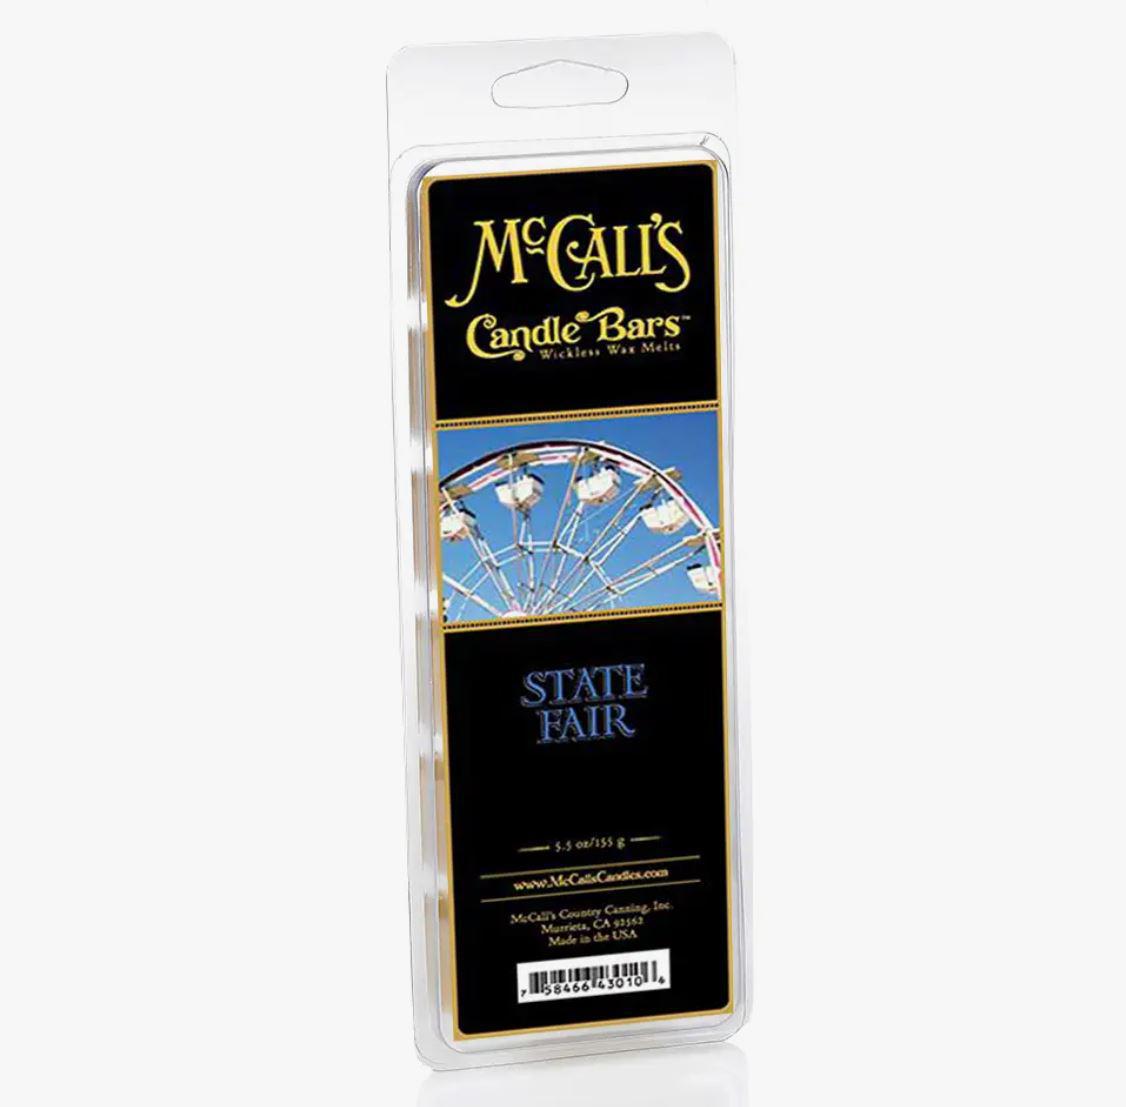 McCall's Candle Bars Wax Melts | State Fair